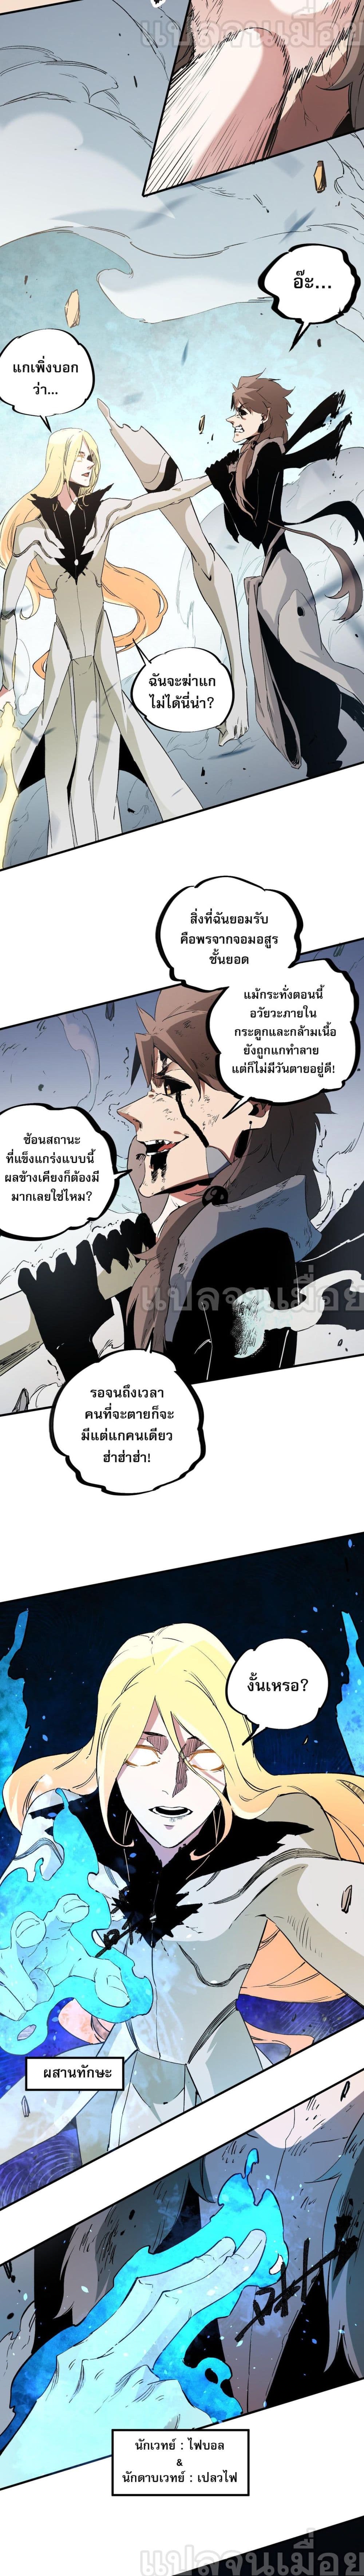 Job Changing for the Entire Population: The Jobless Me Will Terminate the Gods ฉันคือผู้เล่นไร้อาชีพที่สังหารเหล่าเทพ 76-76